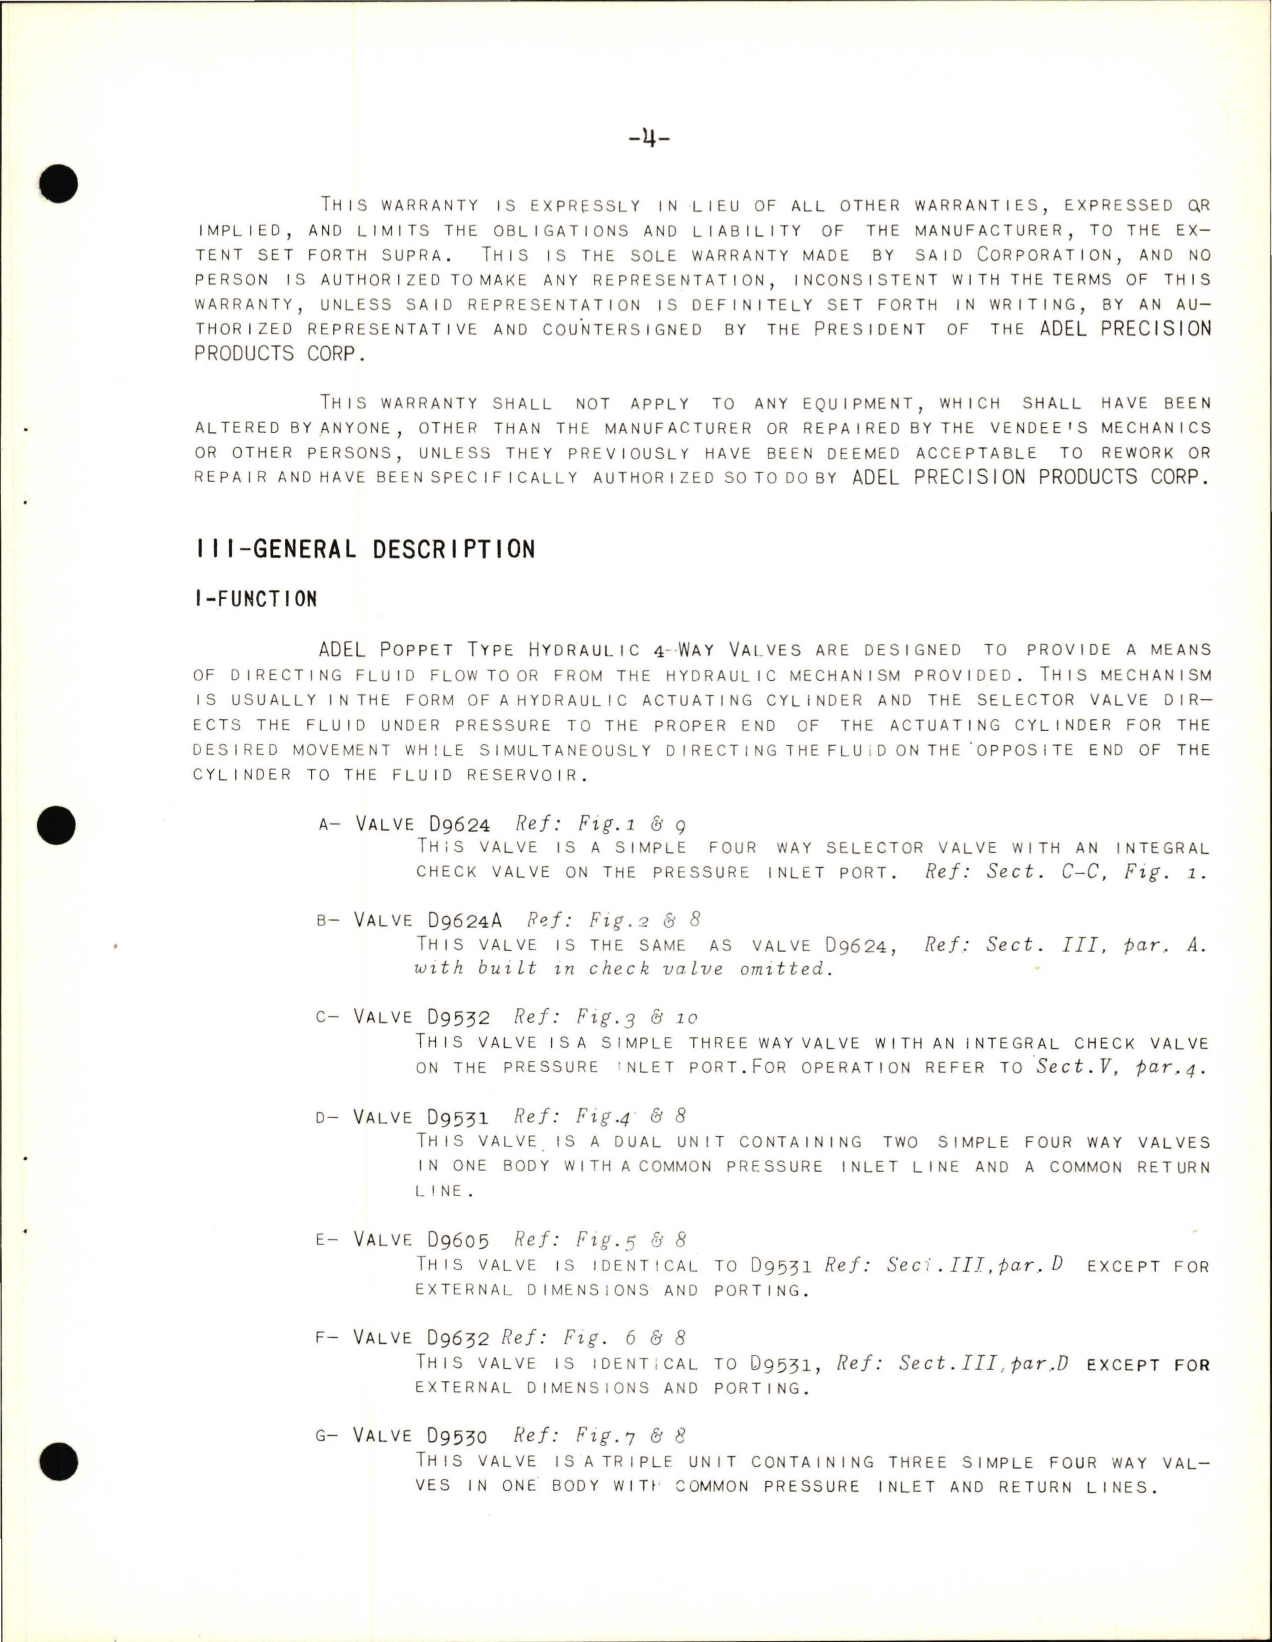 Sample page 7 from AirCorps Library document: Instructions with Parts Catalog for Dural Seat Selector Valve